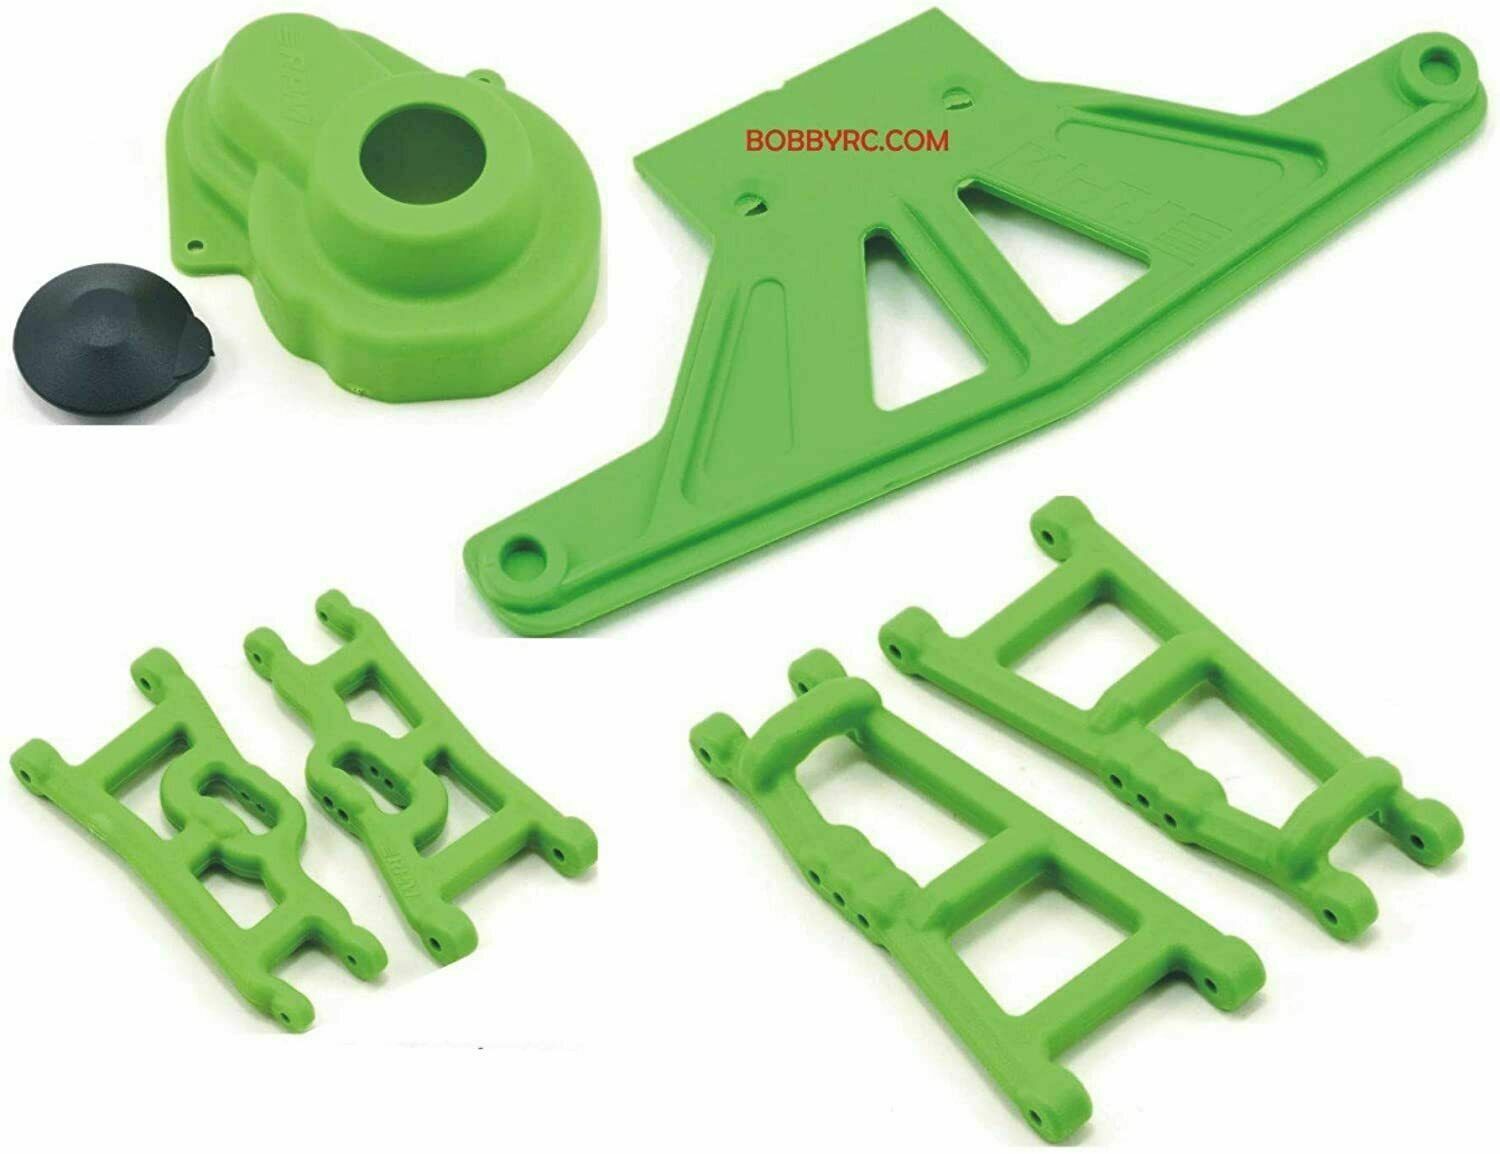 RPM Suspension Arms, Gear Cover & Bumper GREEN For Traxxas 2wd Rustler Stampede